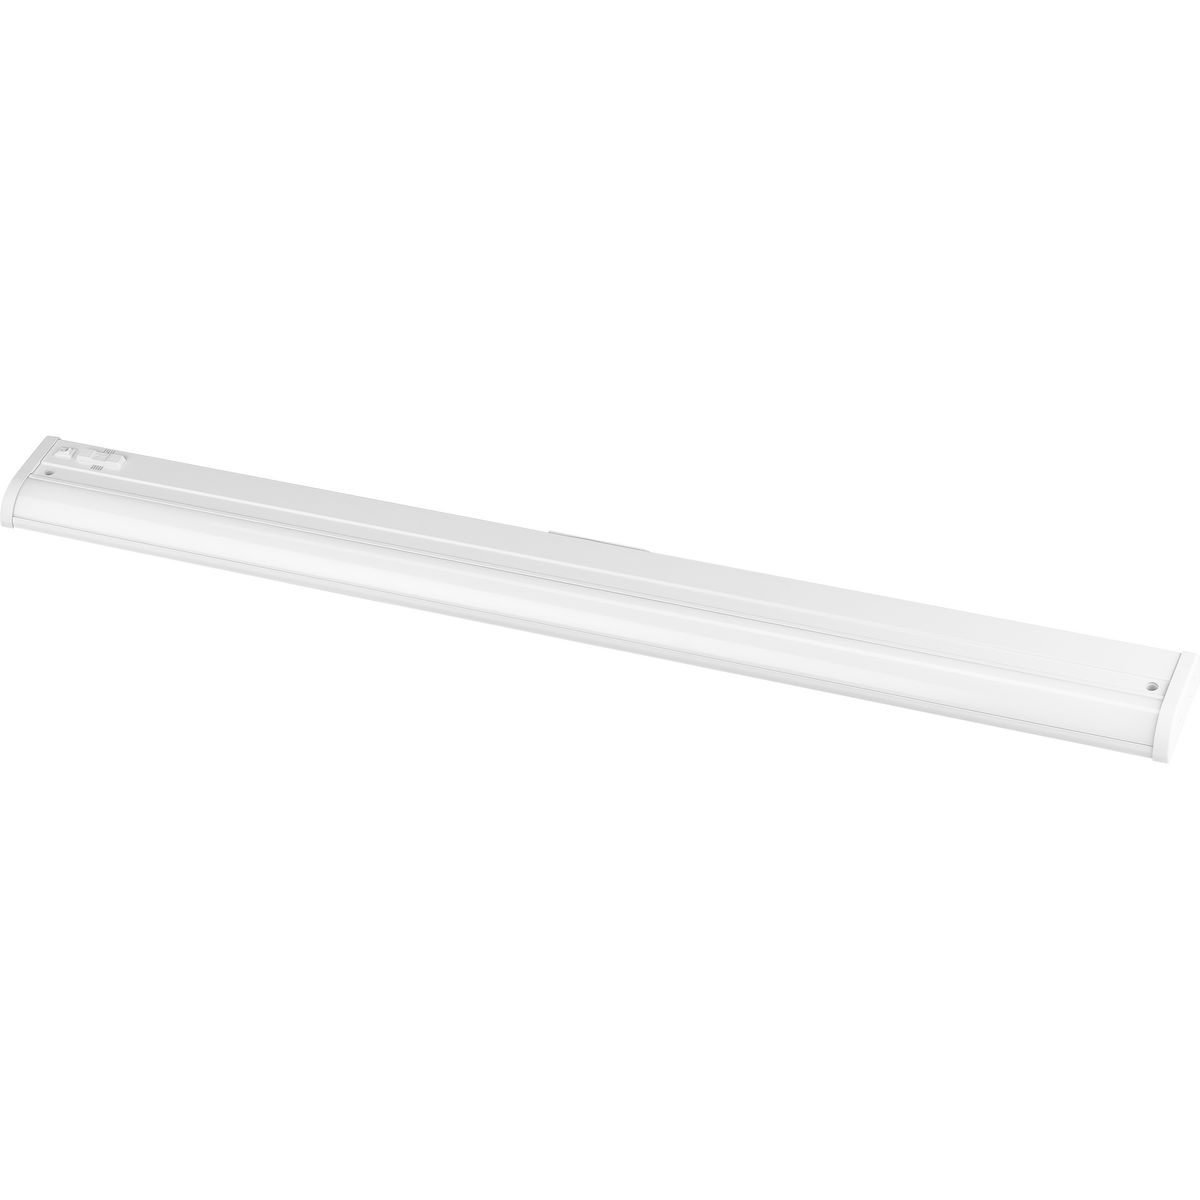 P700028-028-CS 36IN UC LINEAR LED